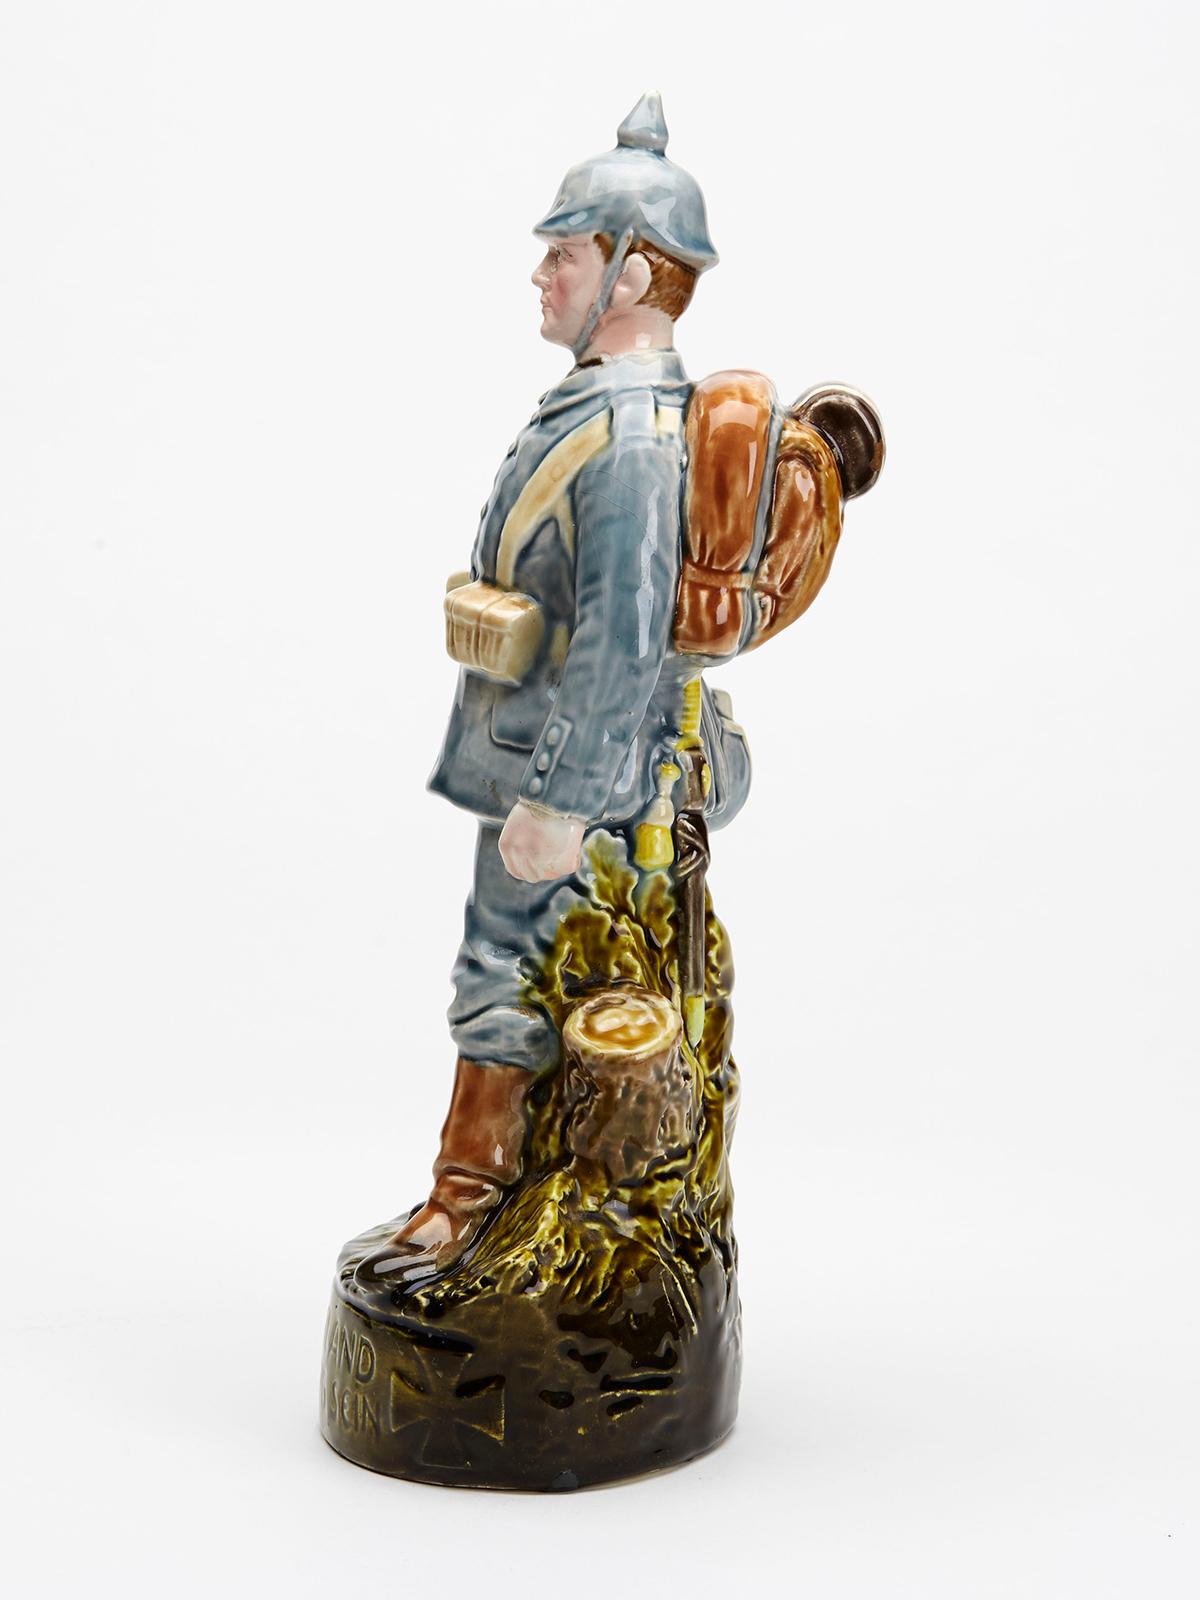 Austro/Bohemian Majolica Bavarian Reservist Military Pottery Figure  In Good Condition For Sale In Bishop's Stortford, Hertfordshire